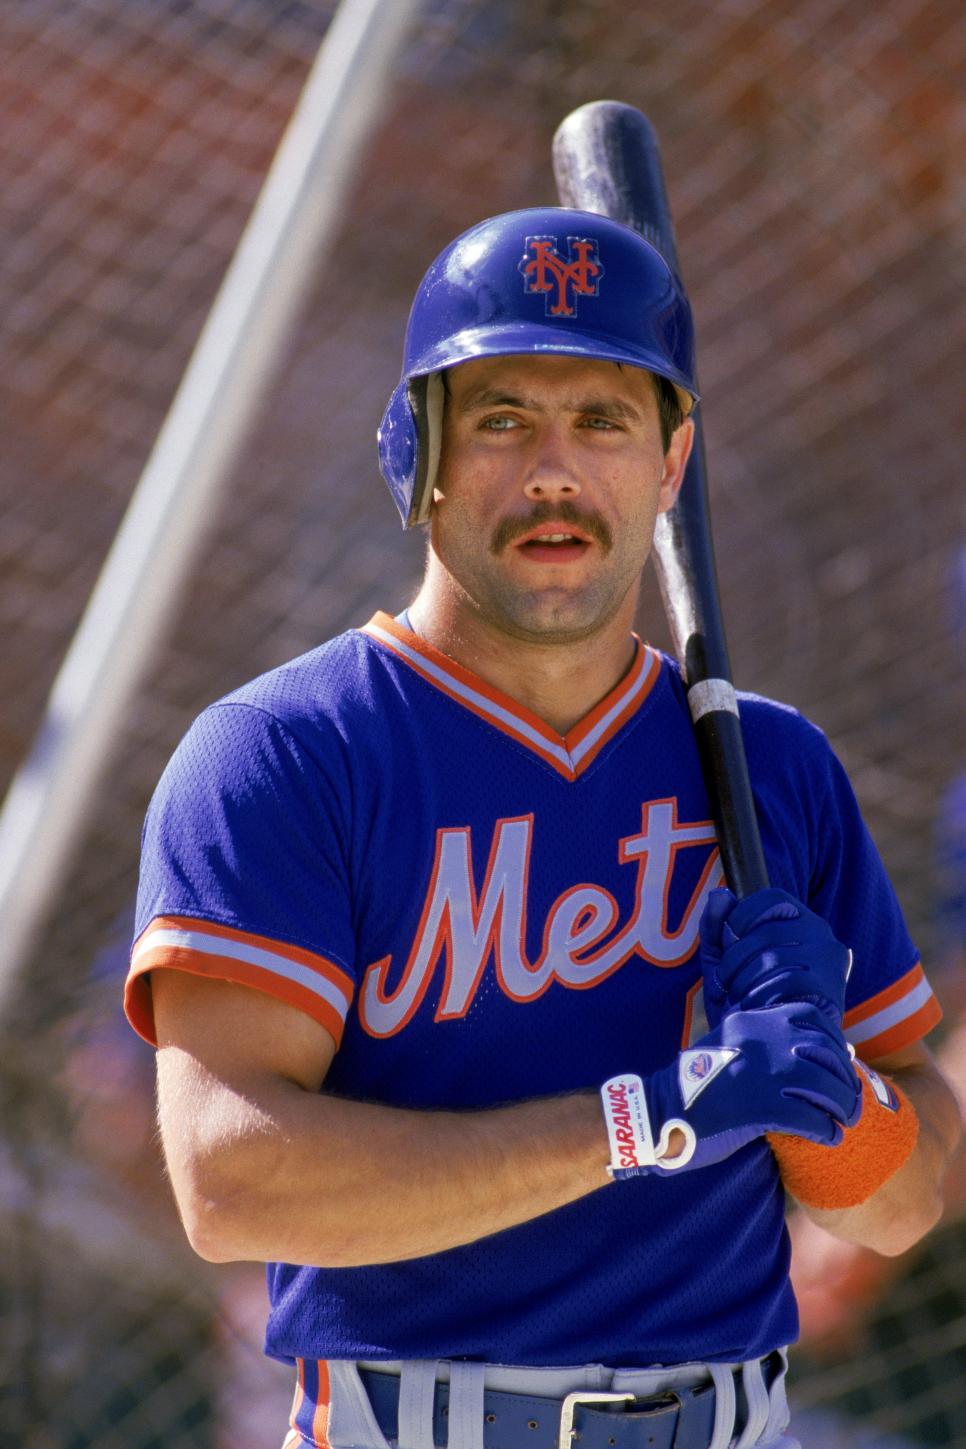 Remembering the greatest mustache team in sports: The '86 Mets